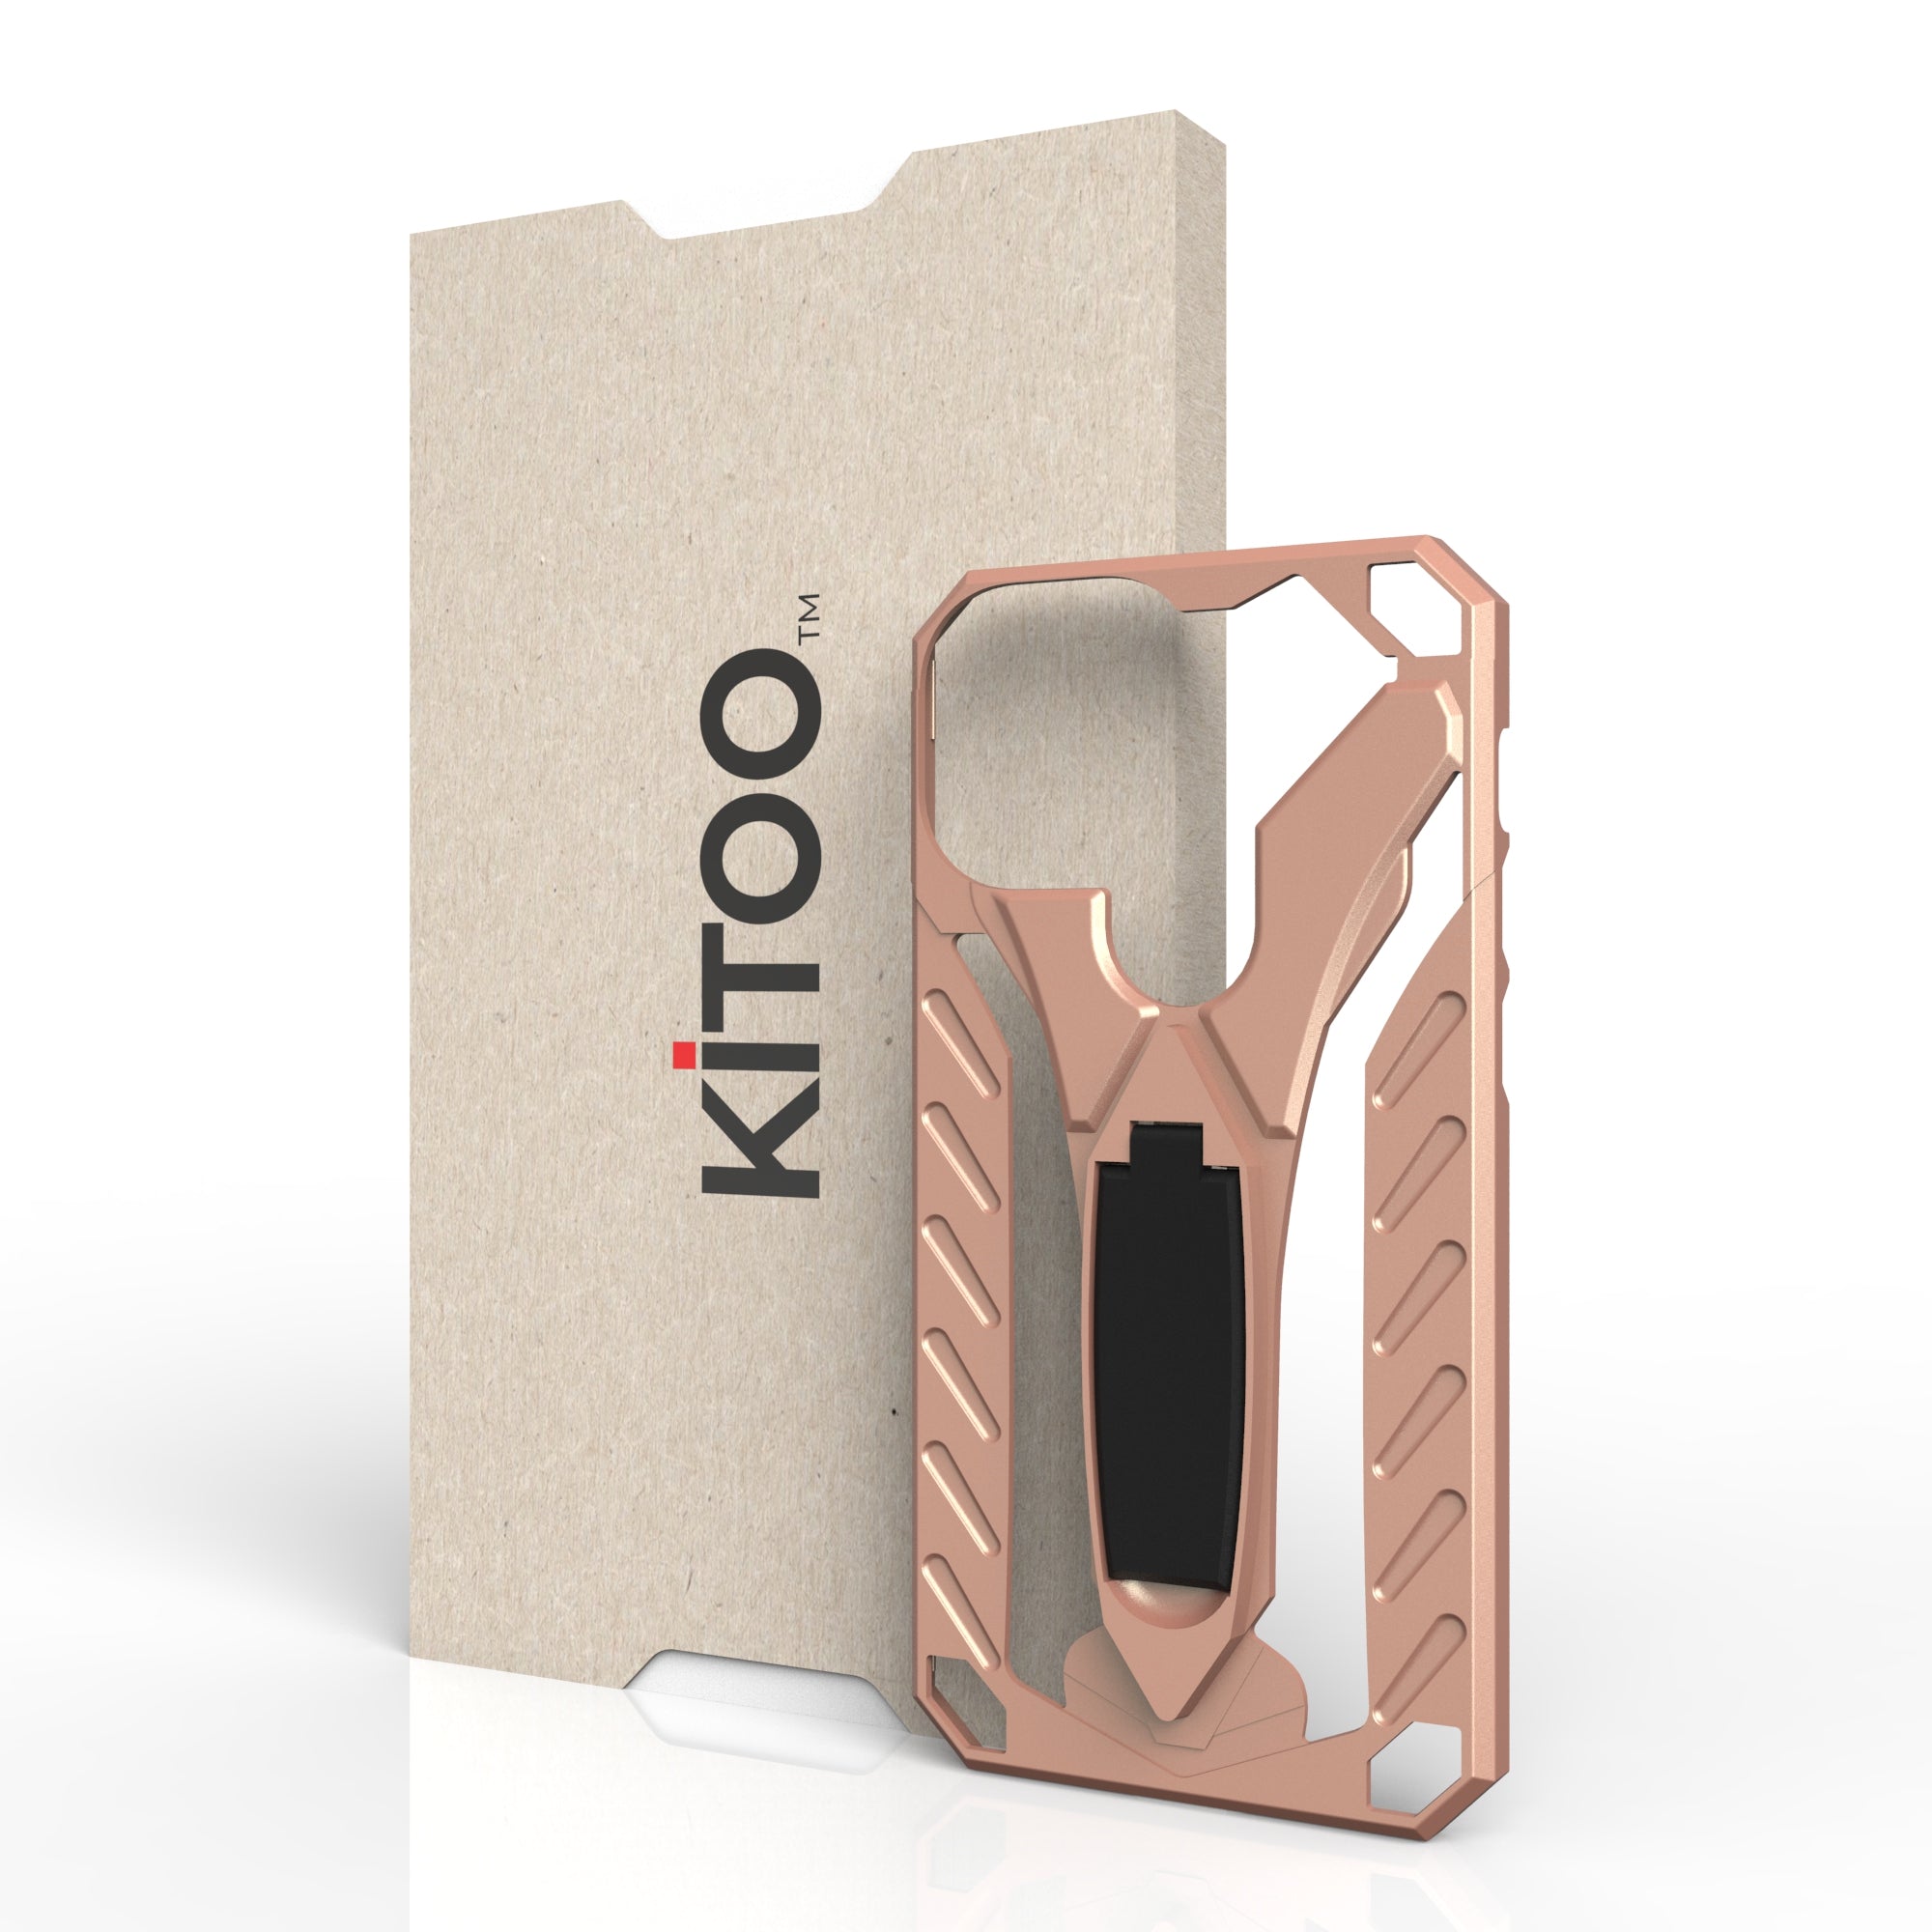 Kitoo Kickstand Panel Designed for iPhone 13 Mini case (Spare Part only) - Rose Golden